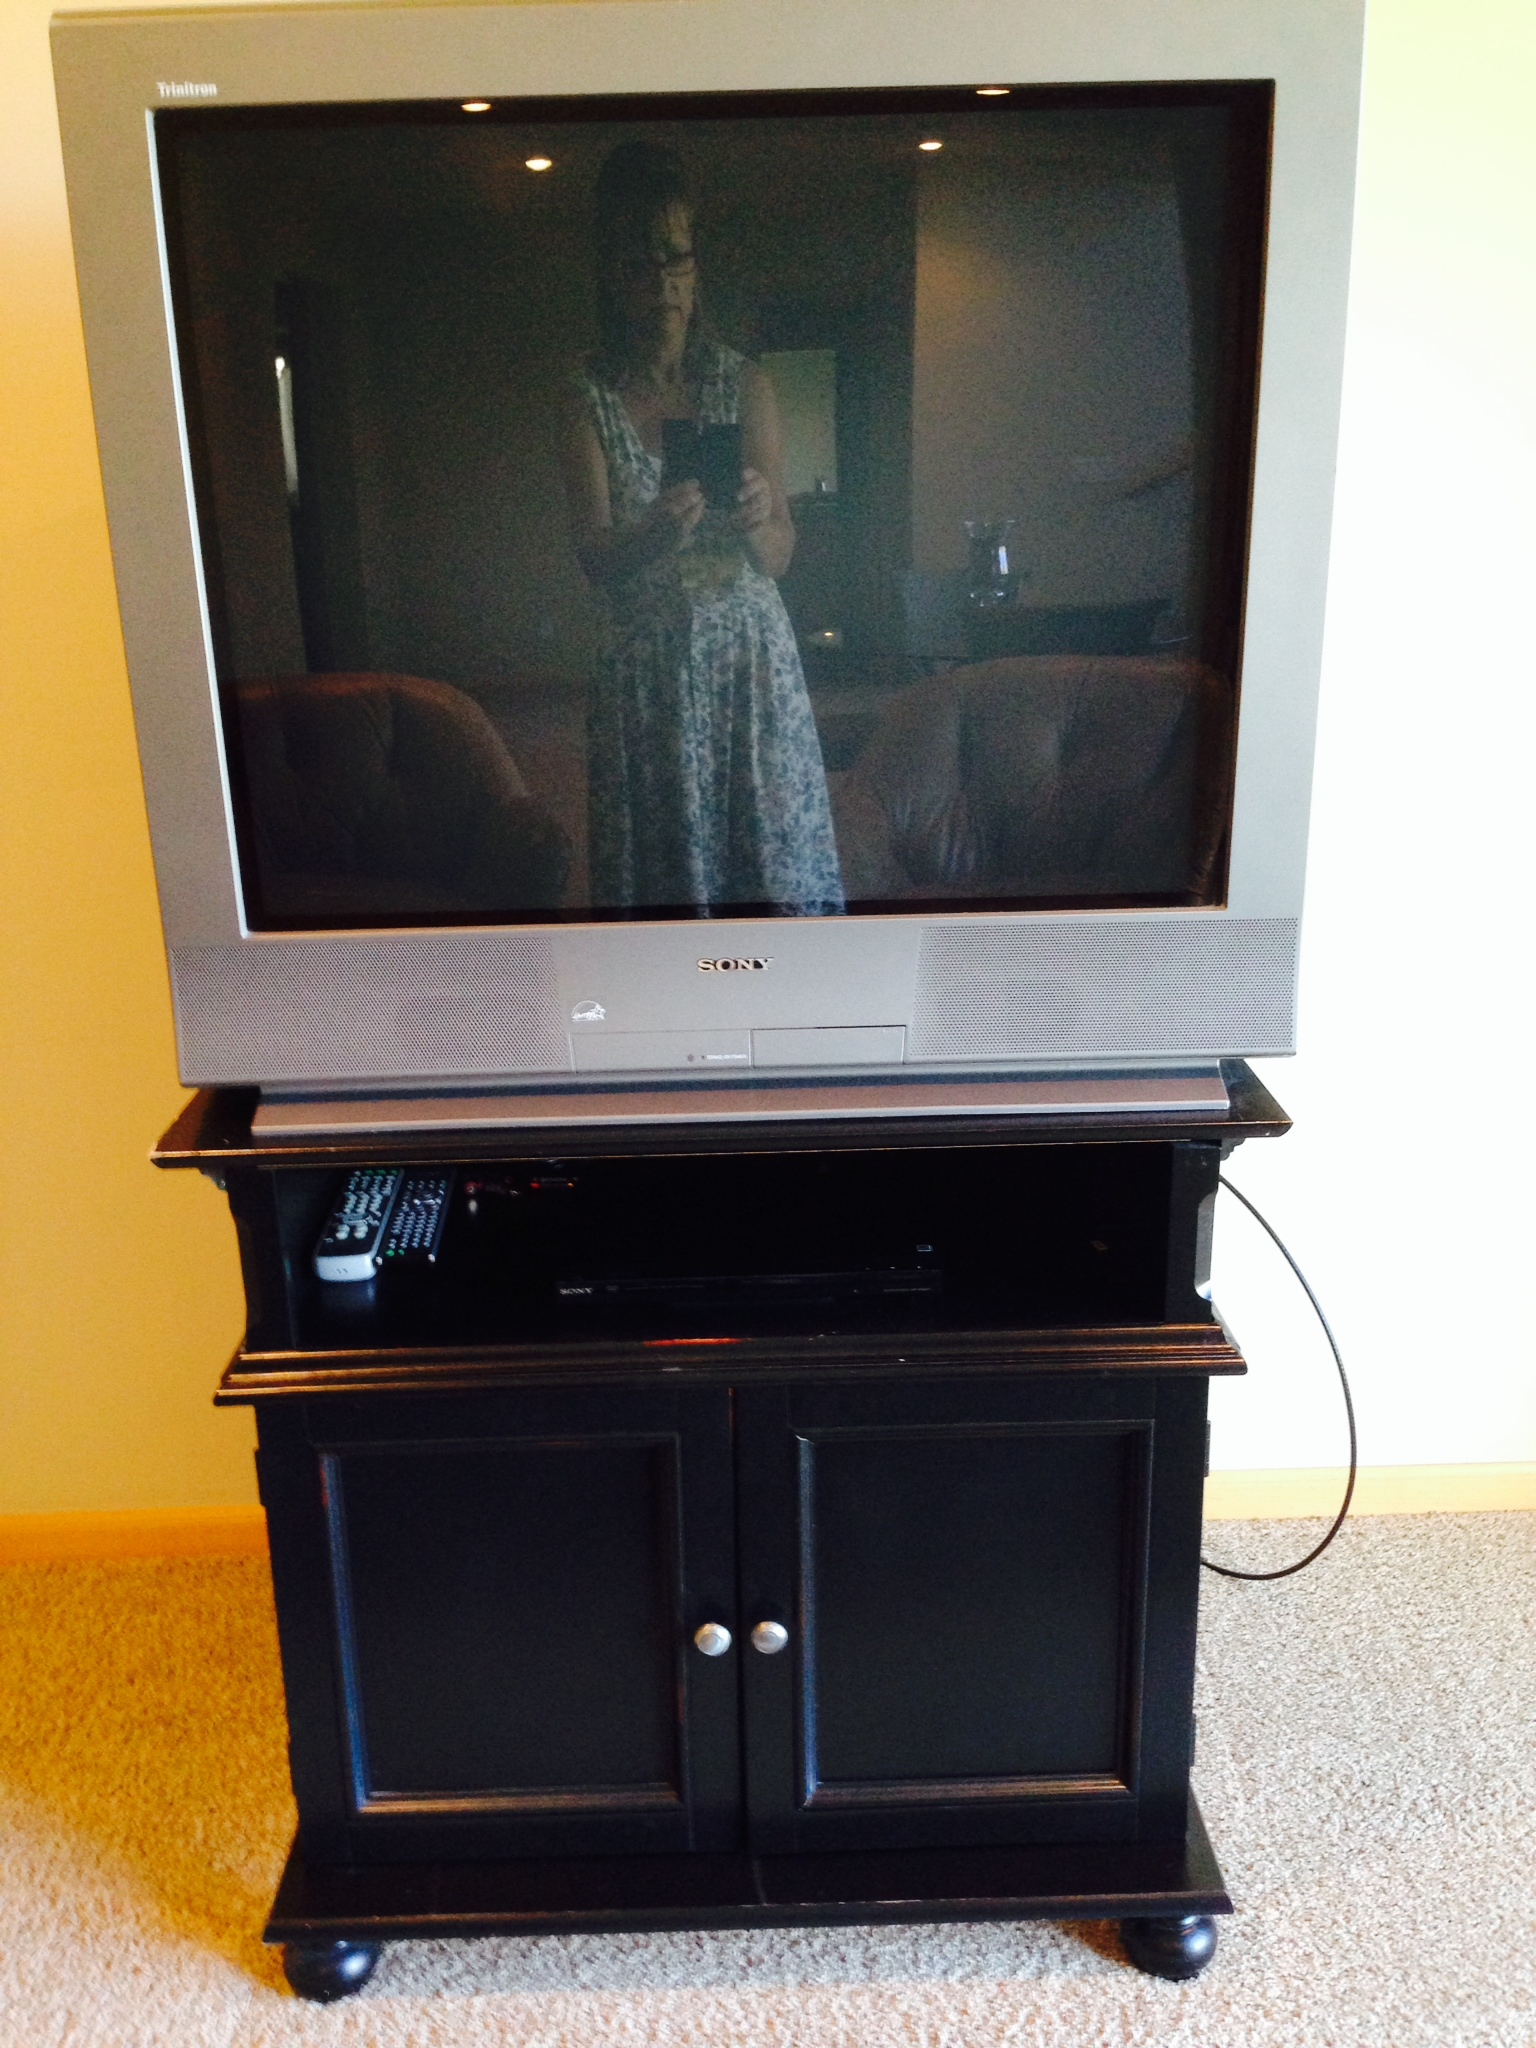 Sony Television and Stand